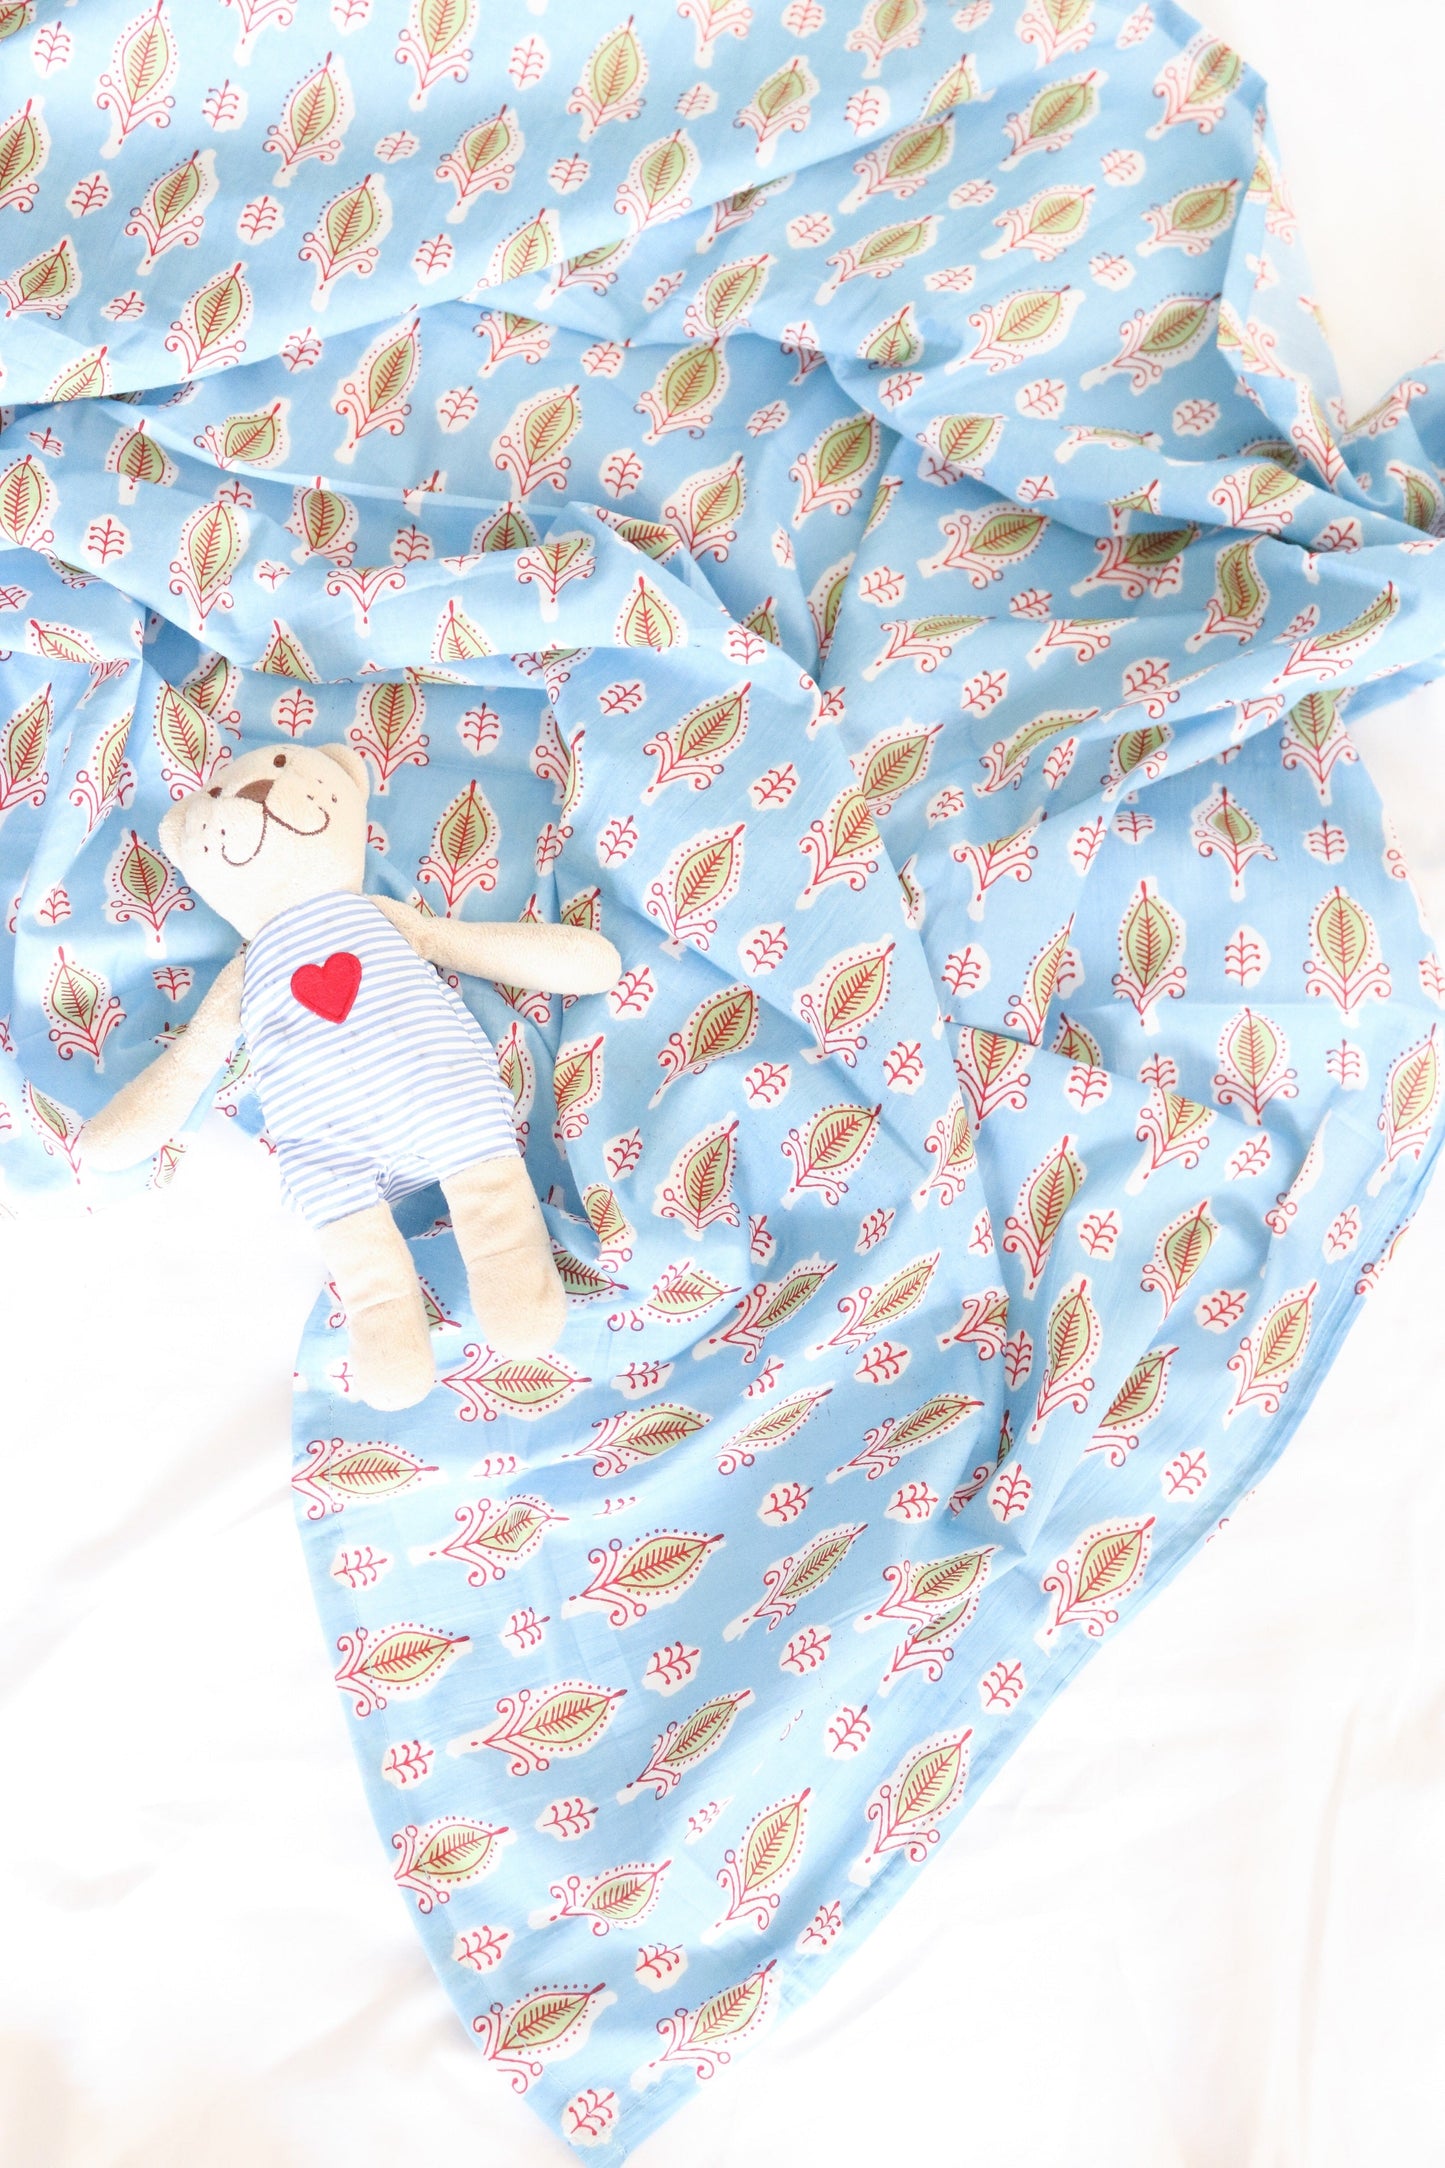 Baby swaddle wrap - baby sheets - 38x38 inches - Cotton sheets for baby - Light blue booti